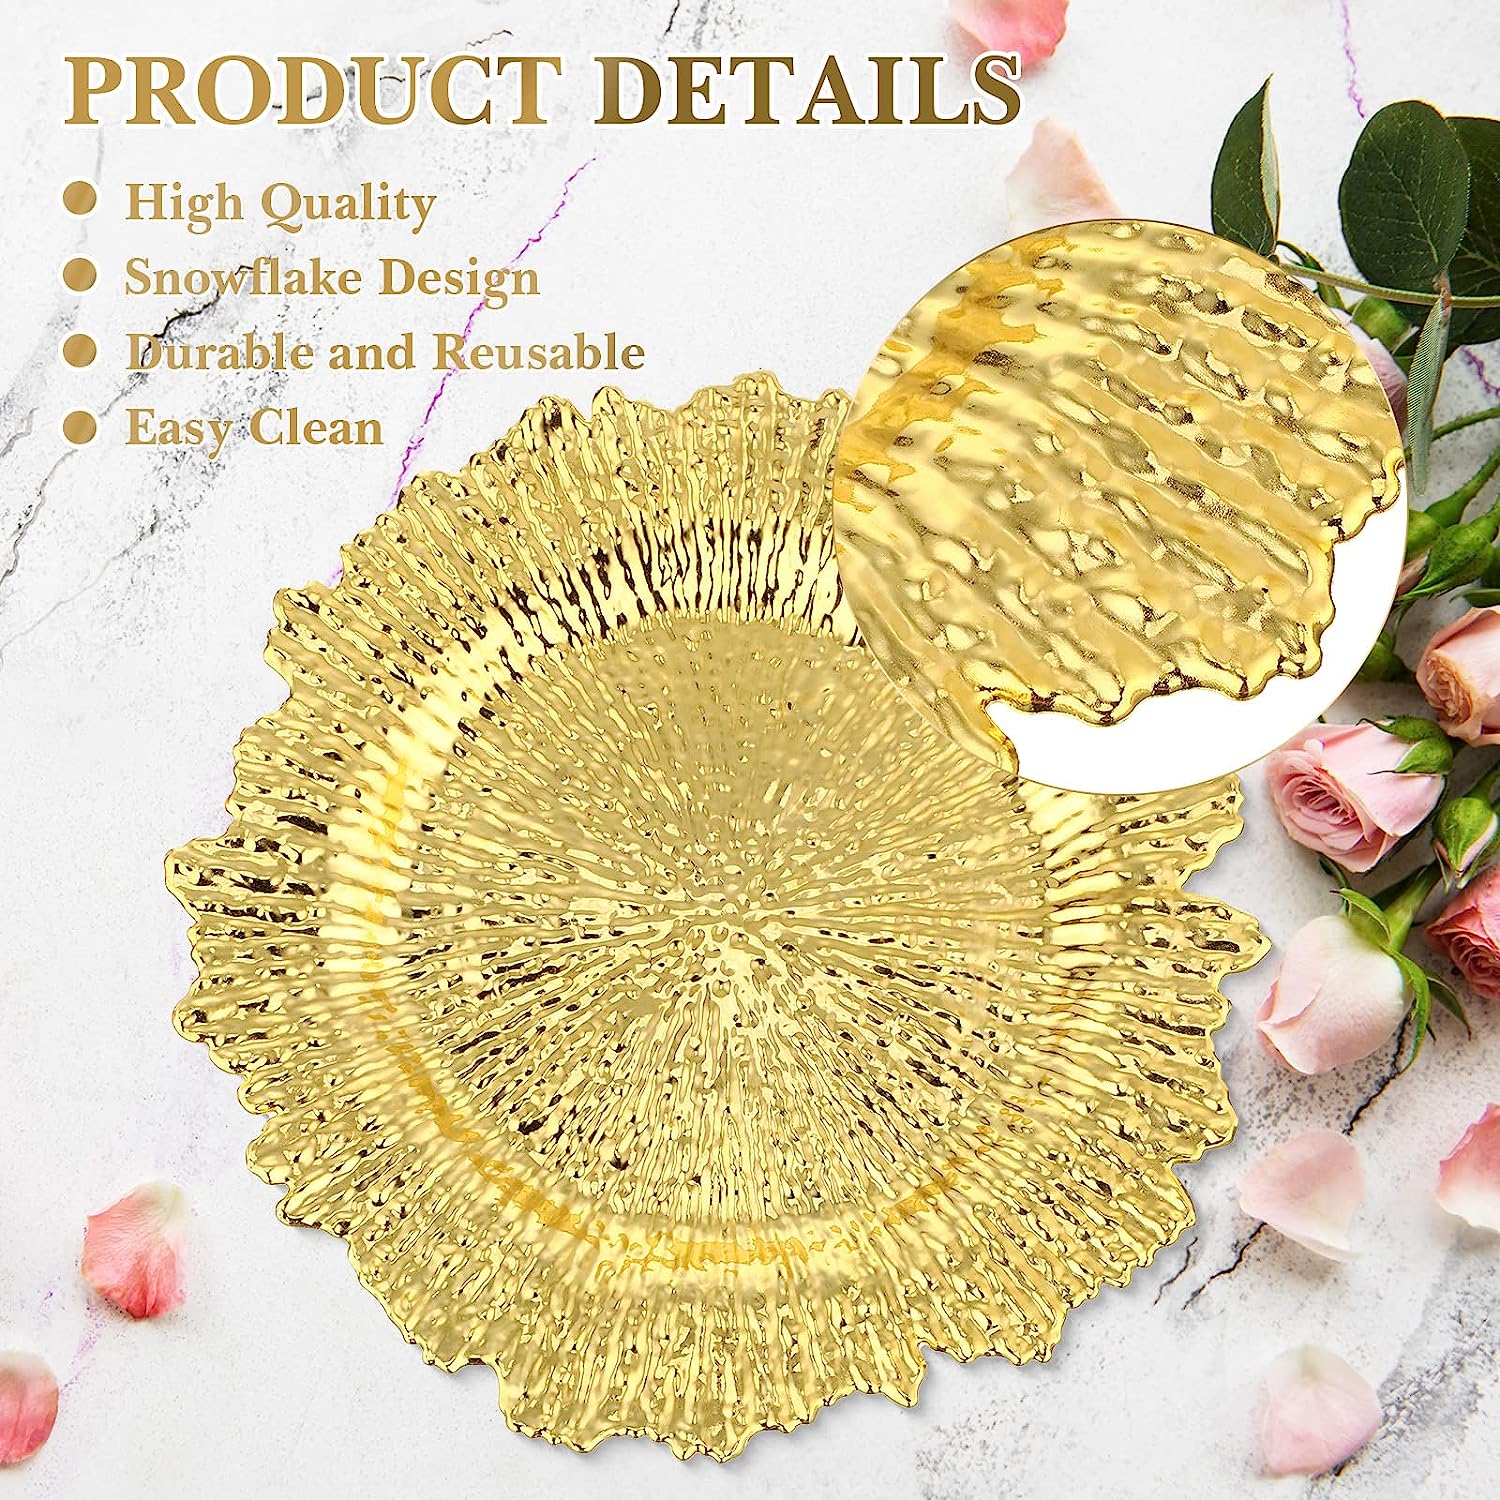 Wedding Party Plate Electroplating Light Luxury PP Plate Antique Large Living Room Fruit Plate Edge Hot Gold Foil